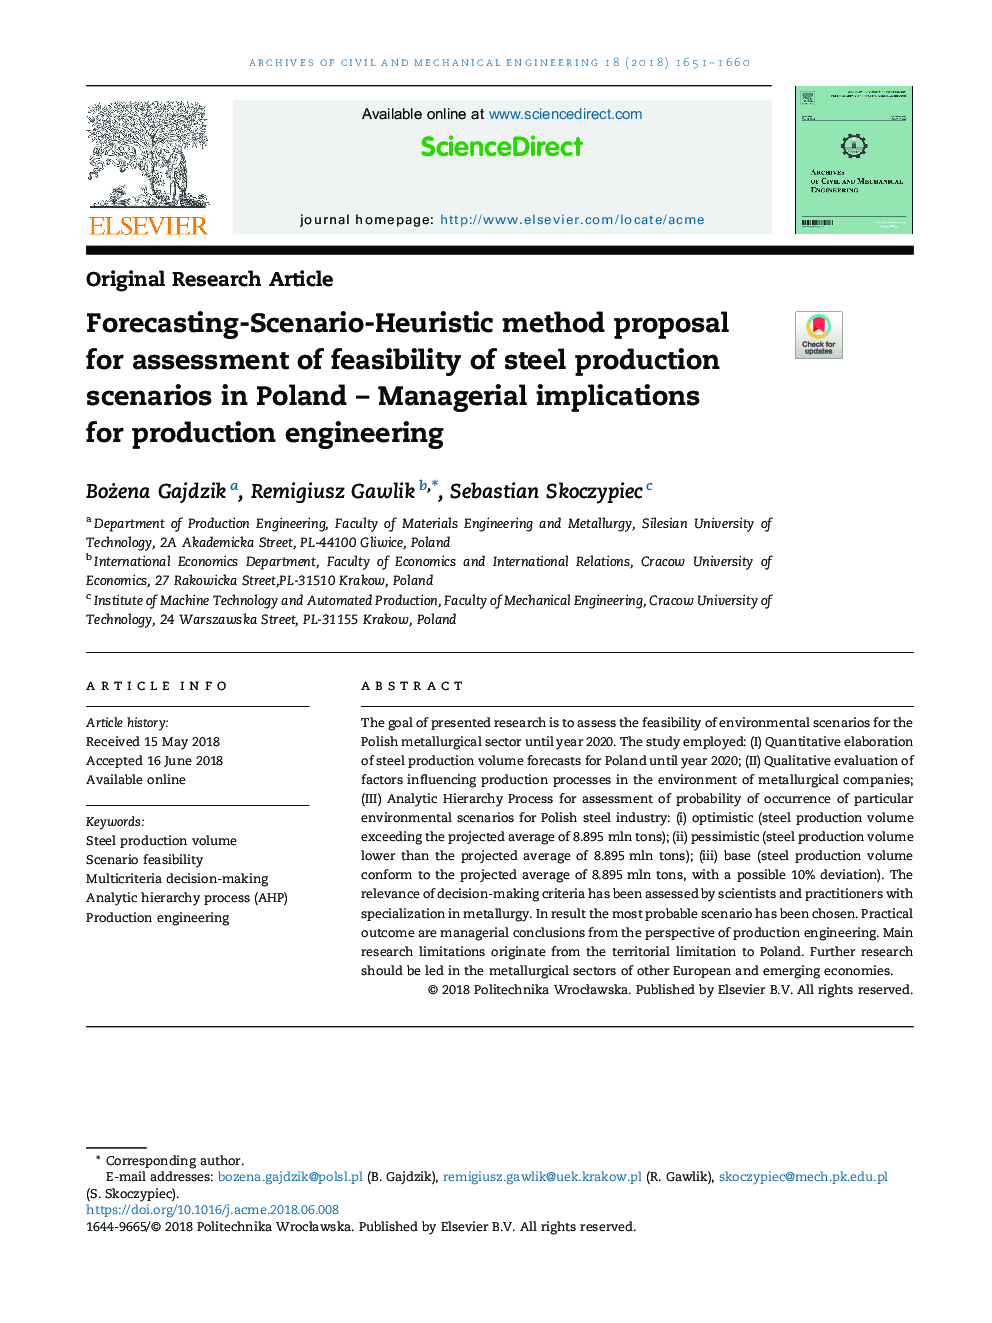 Forecasting-Scenario-Heuristic method proposal for assessment of feasibility of steel production scenarios in Poland - Managerial implications for production engineering